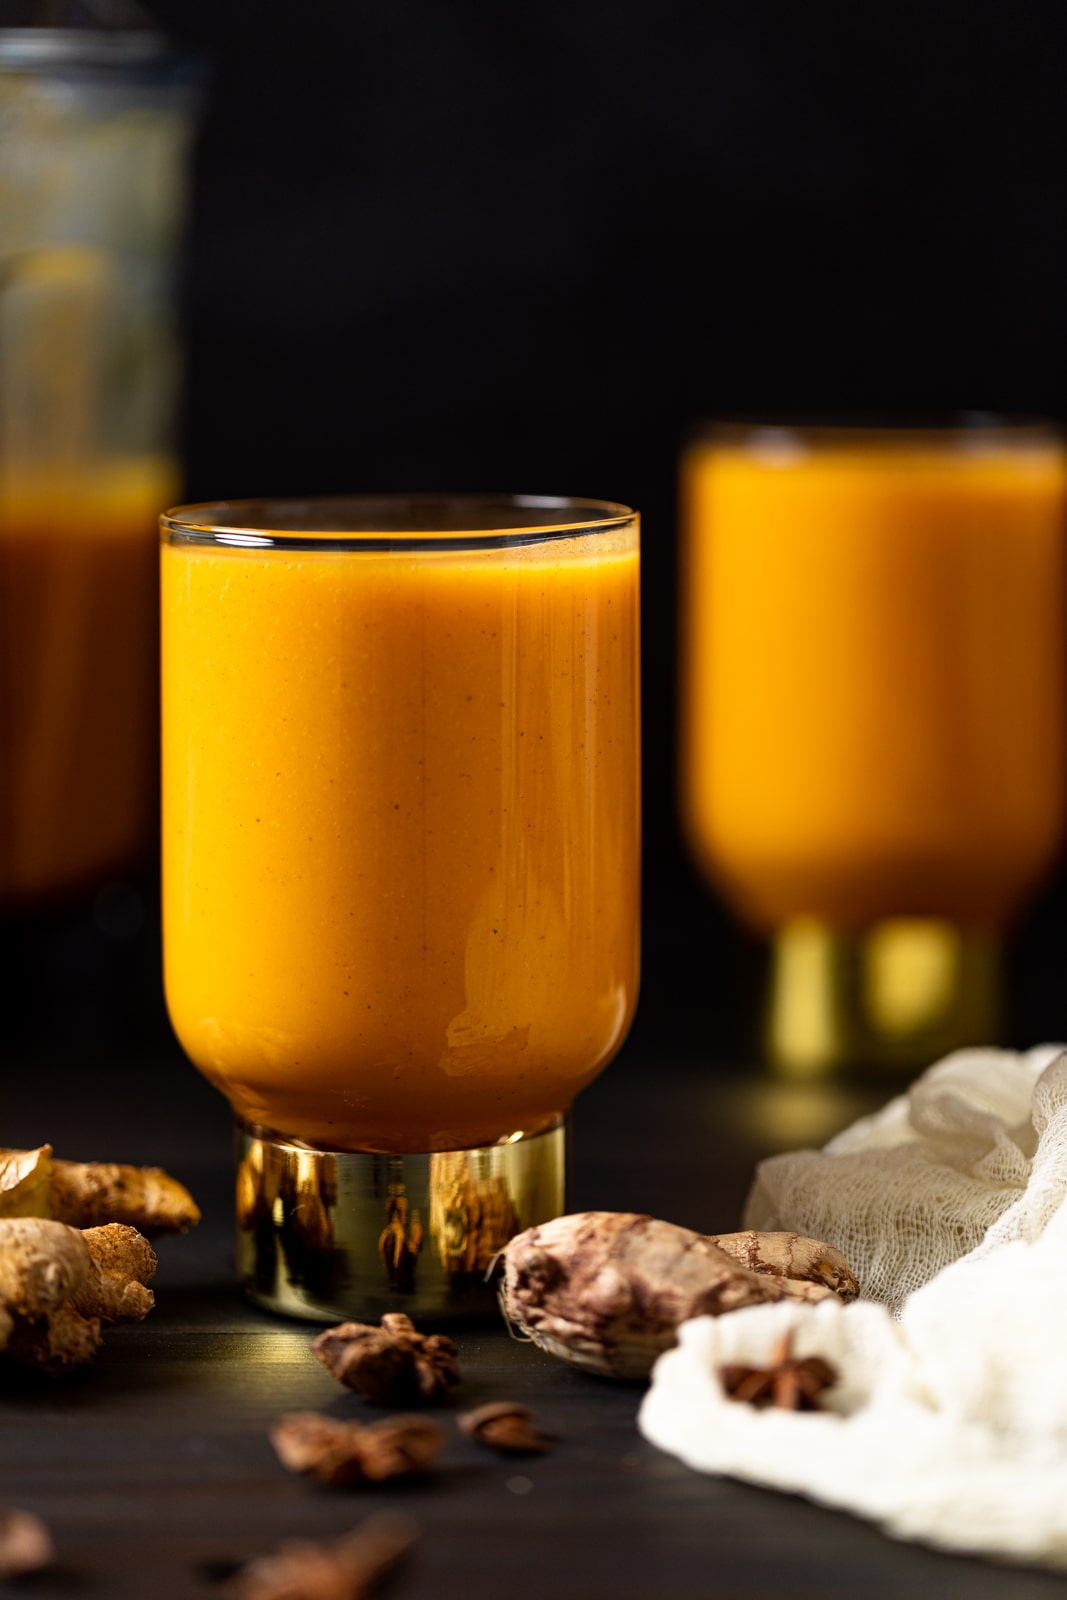 Vegan Jamaican Carrot Juice in a small glass with a golden base